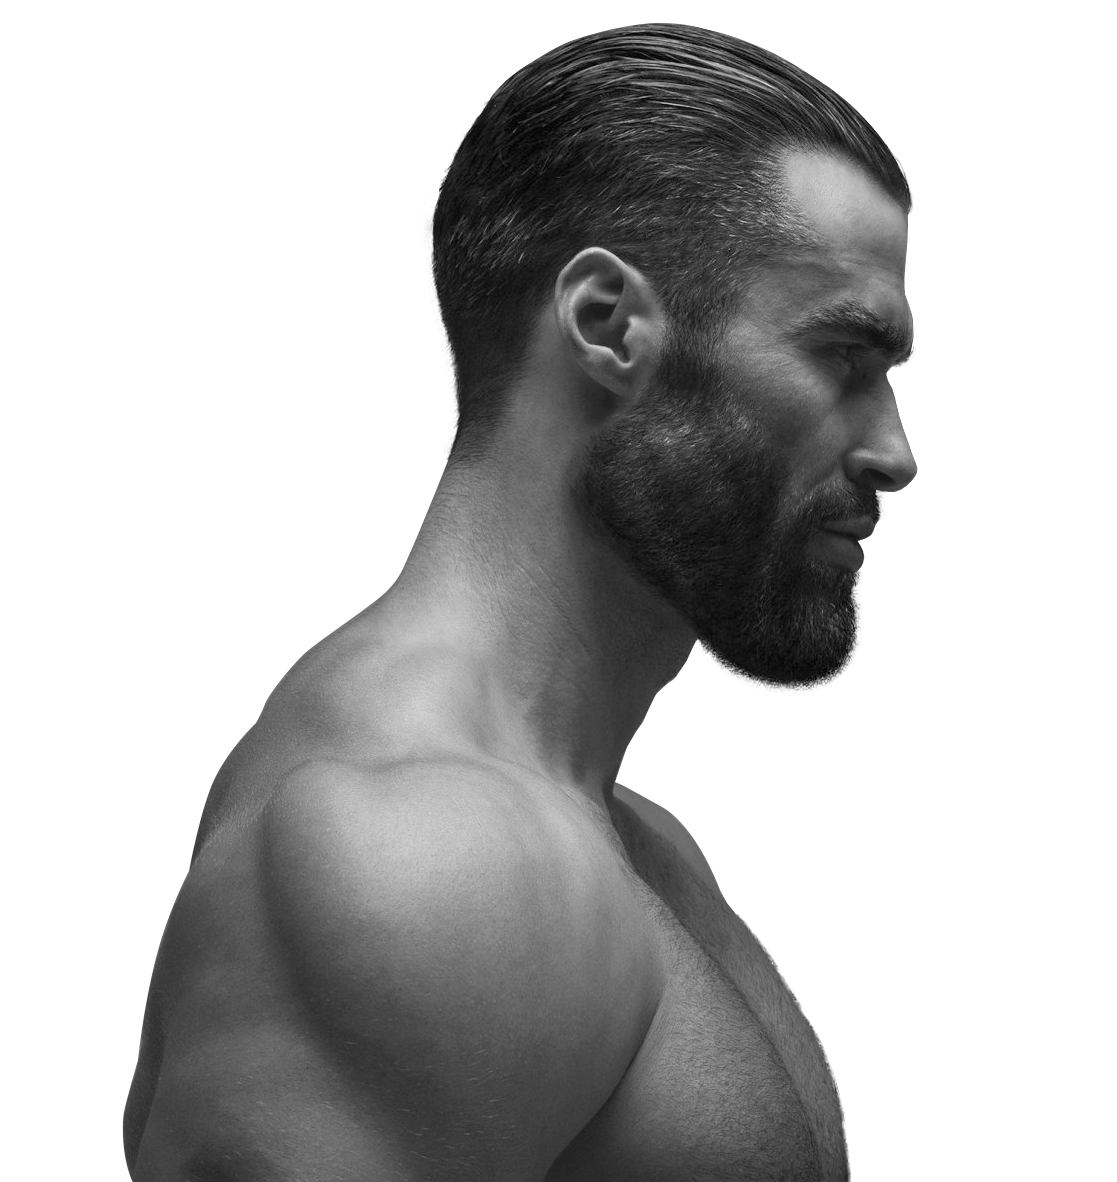 Chad Meme Background PNG - PNG All